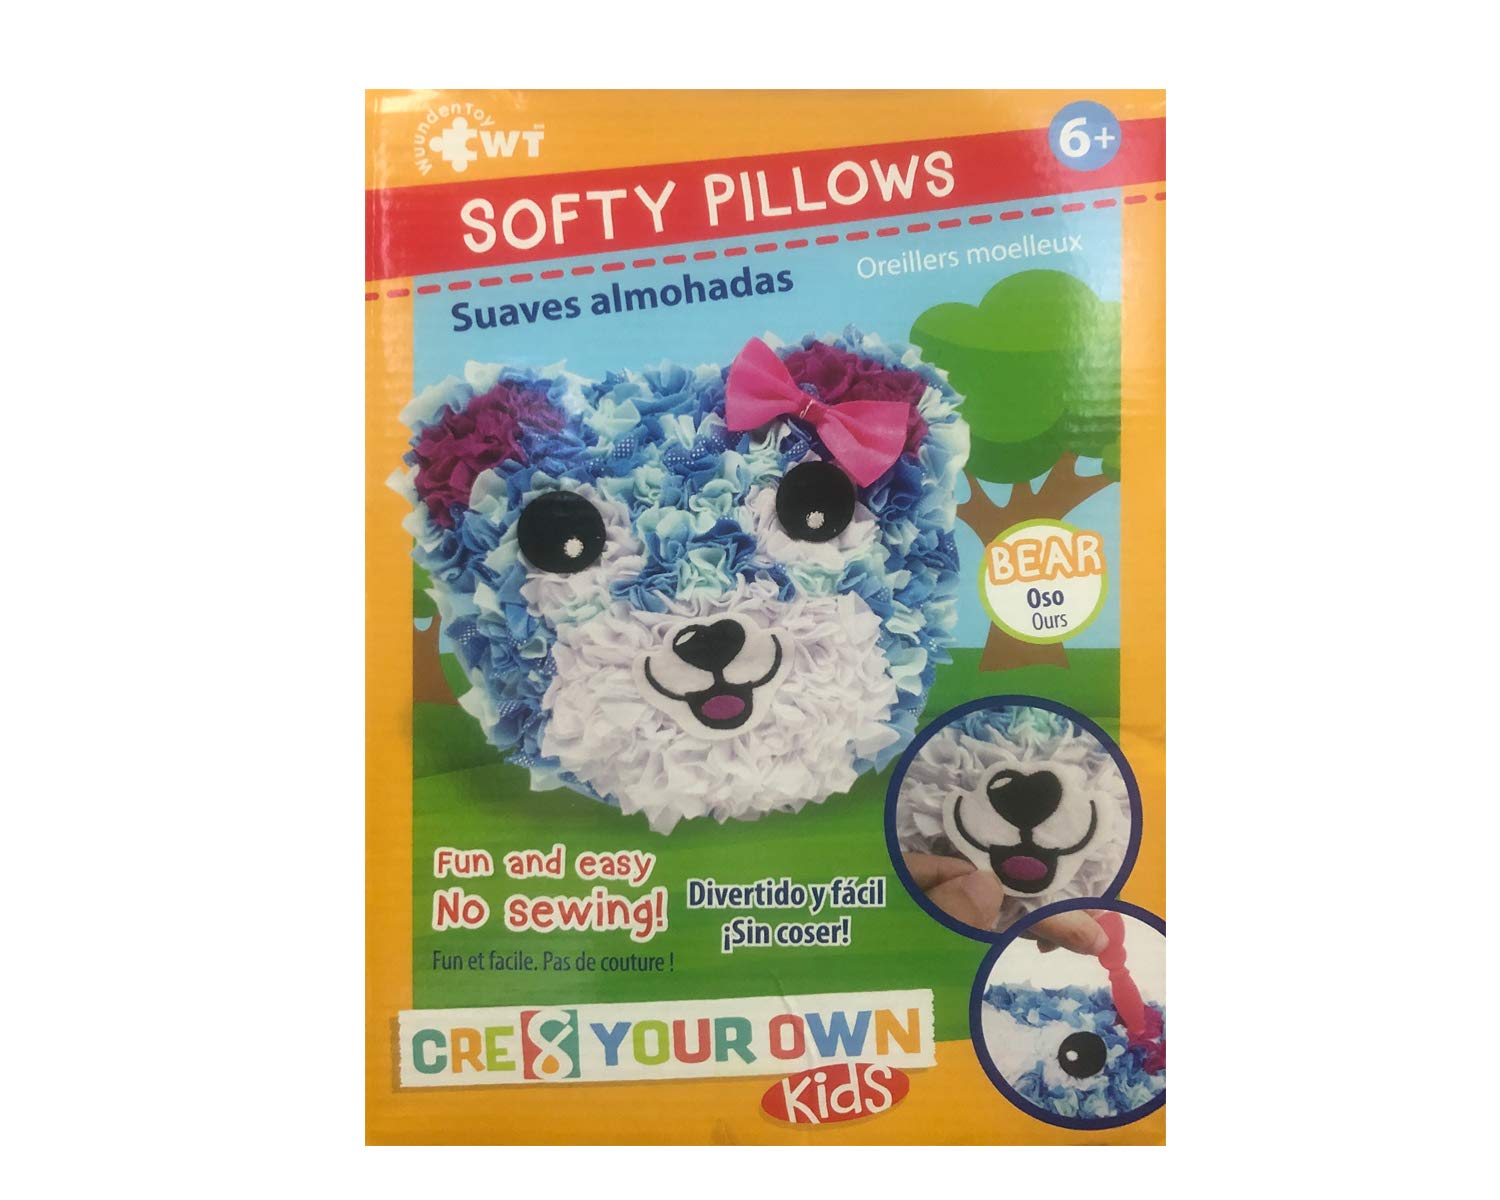 Cre8 Your Own Softy Pillows Bear Stuffed Plush